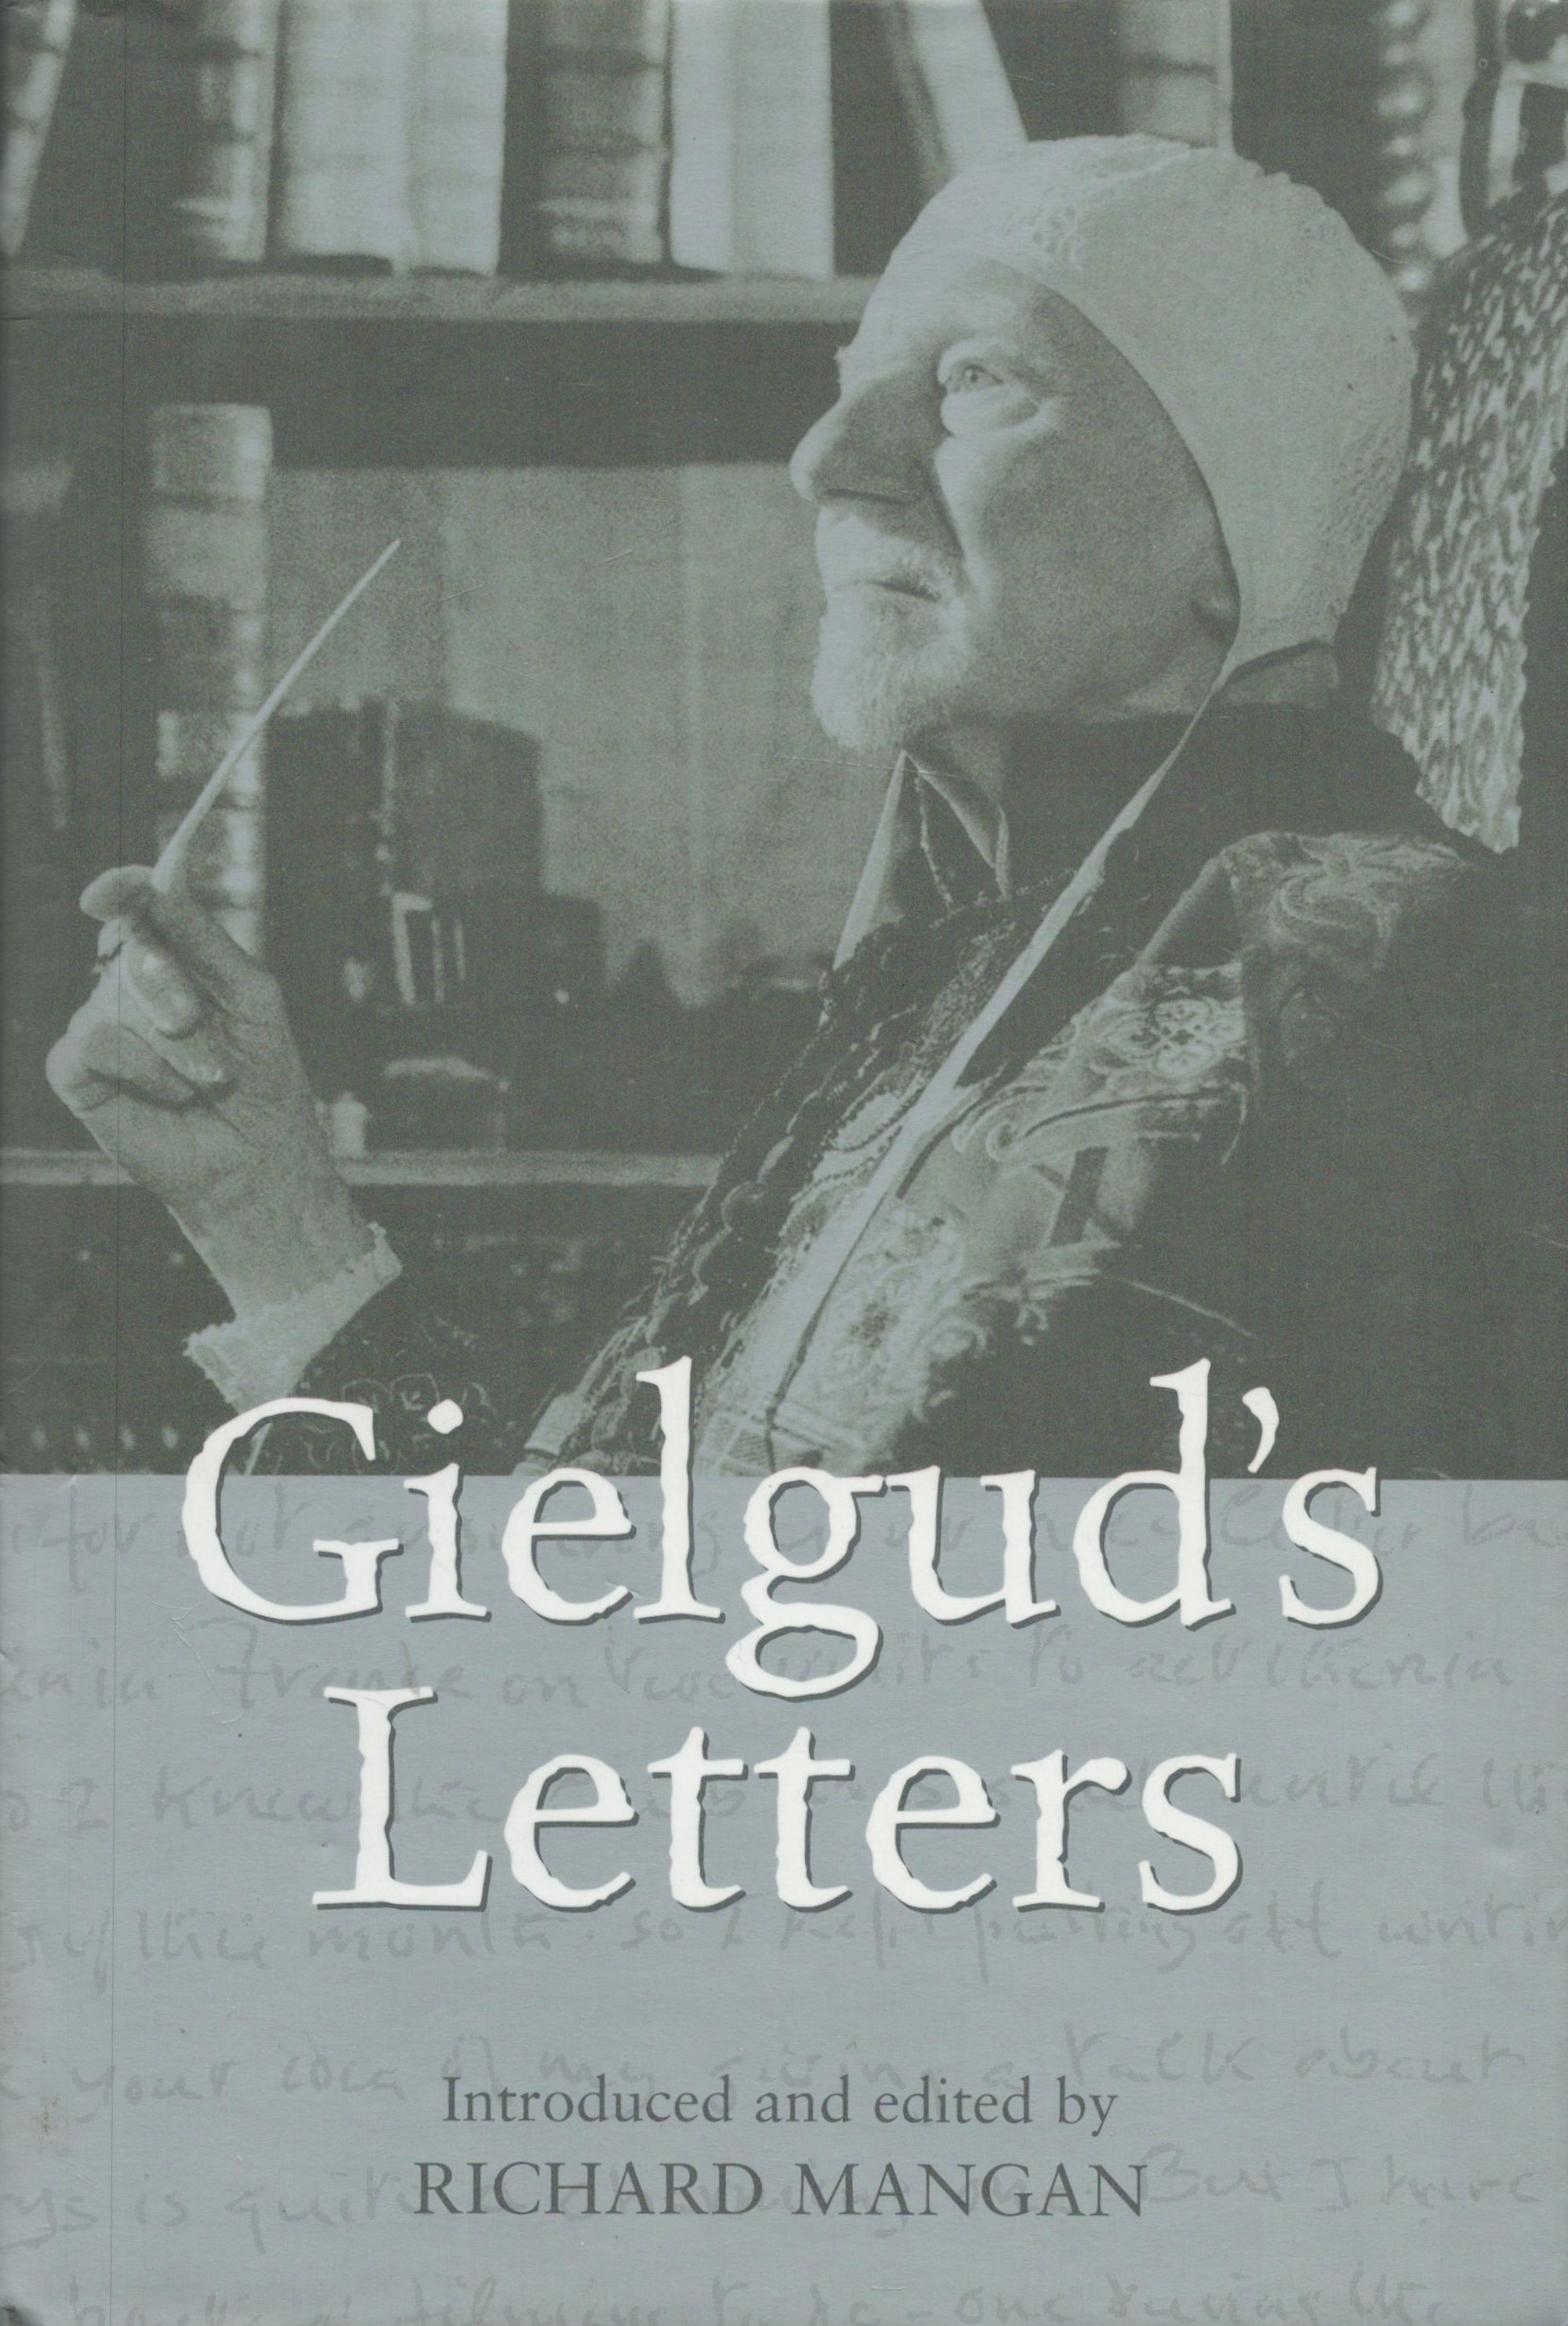 Gielgud's Letters 2004, edited by Richard Mangan, unsigned but comes with an original compliments